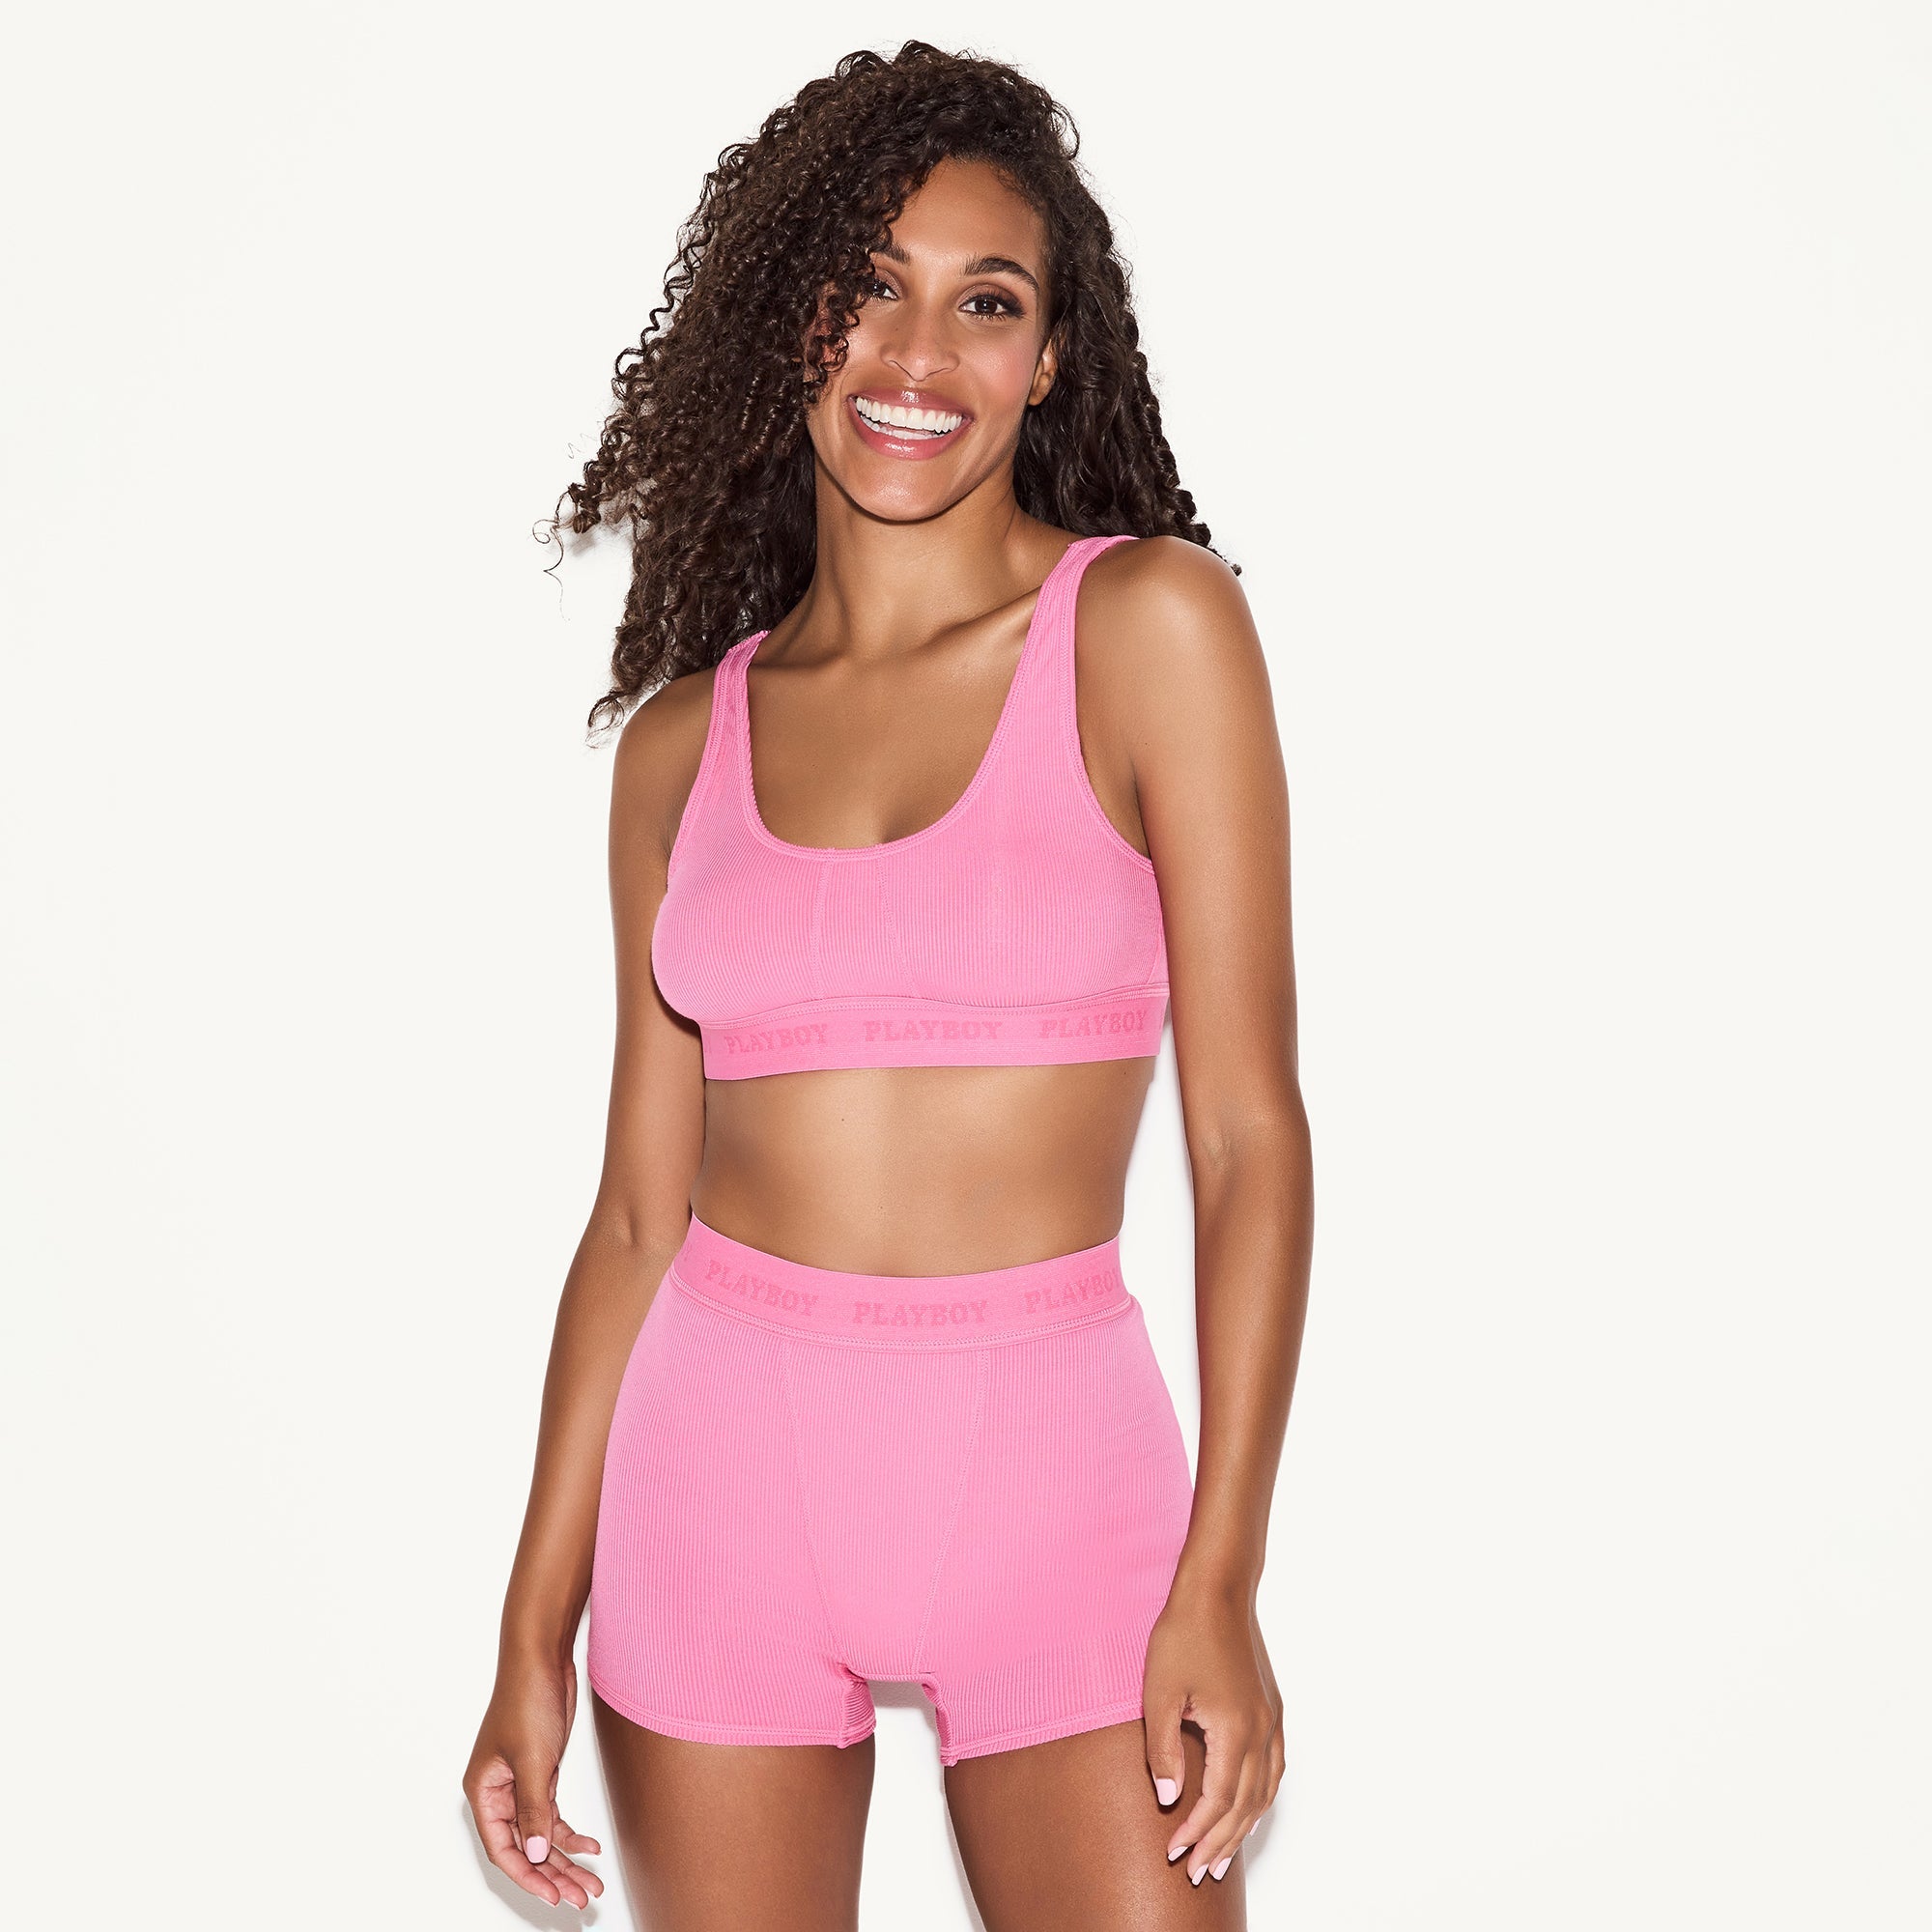 Forever 21 Pink Strappy Sports Bra Size XS - $10 - From Kenzie